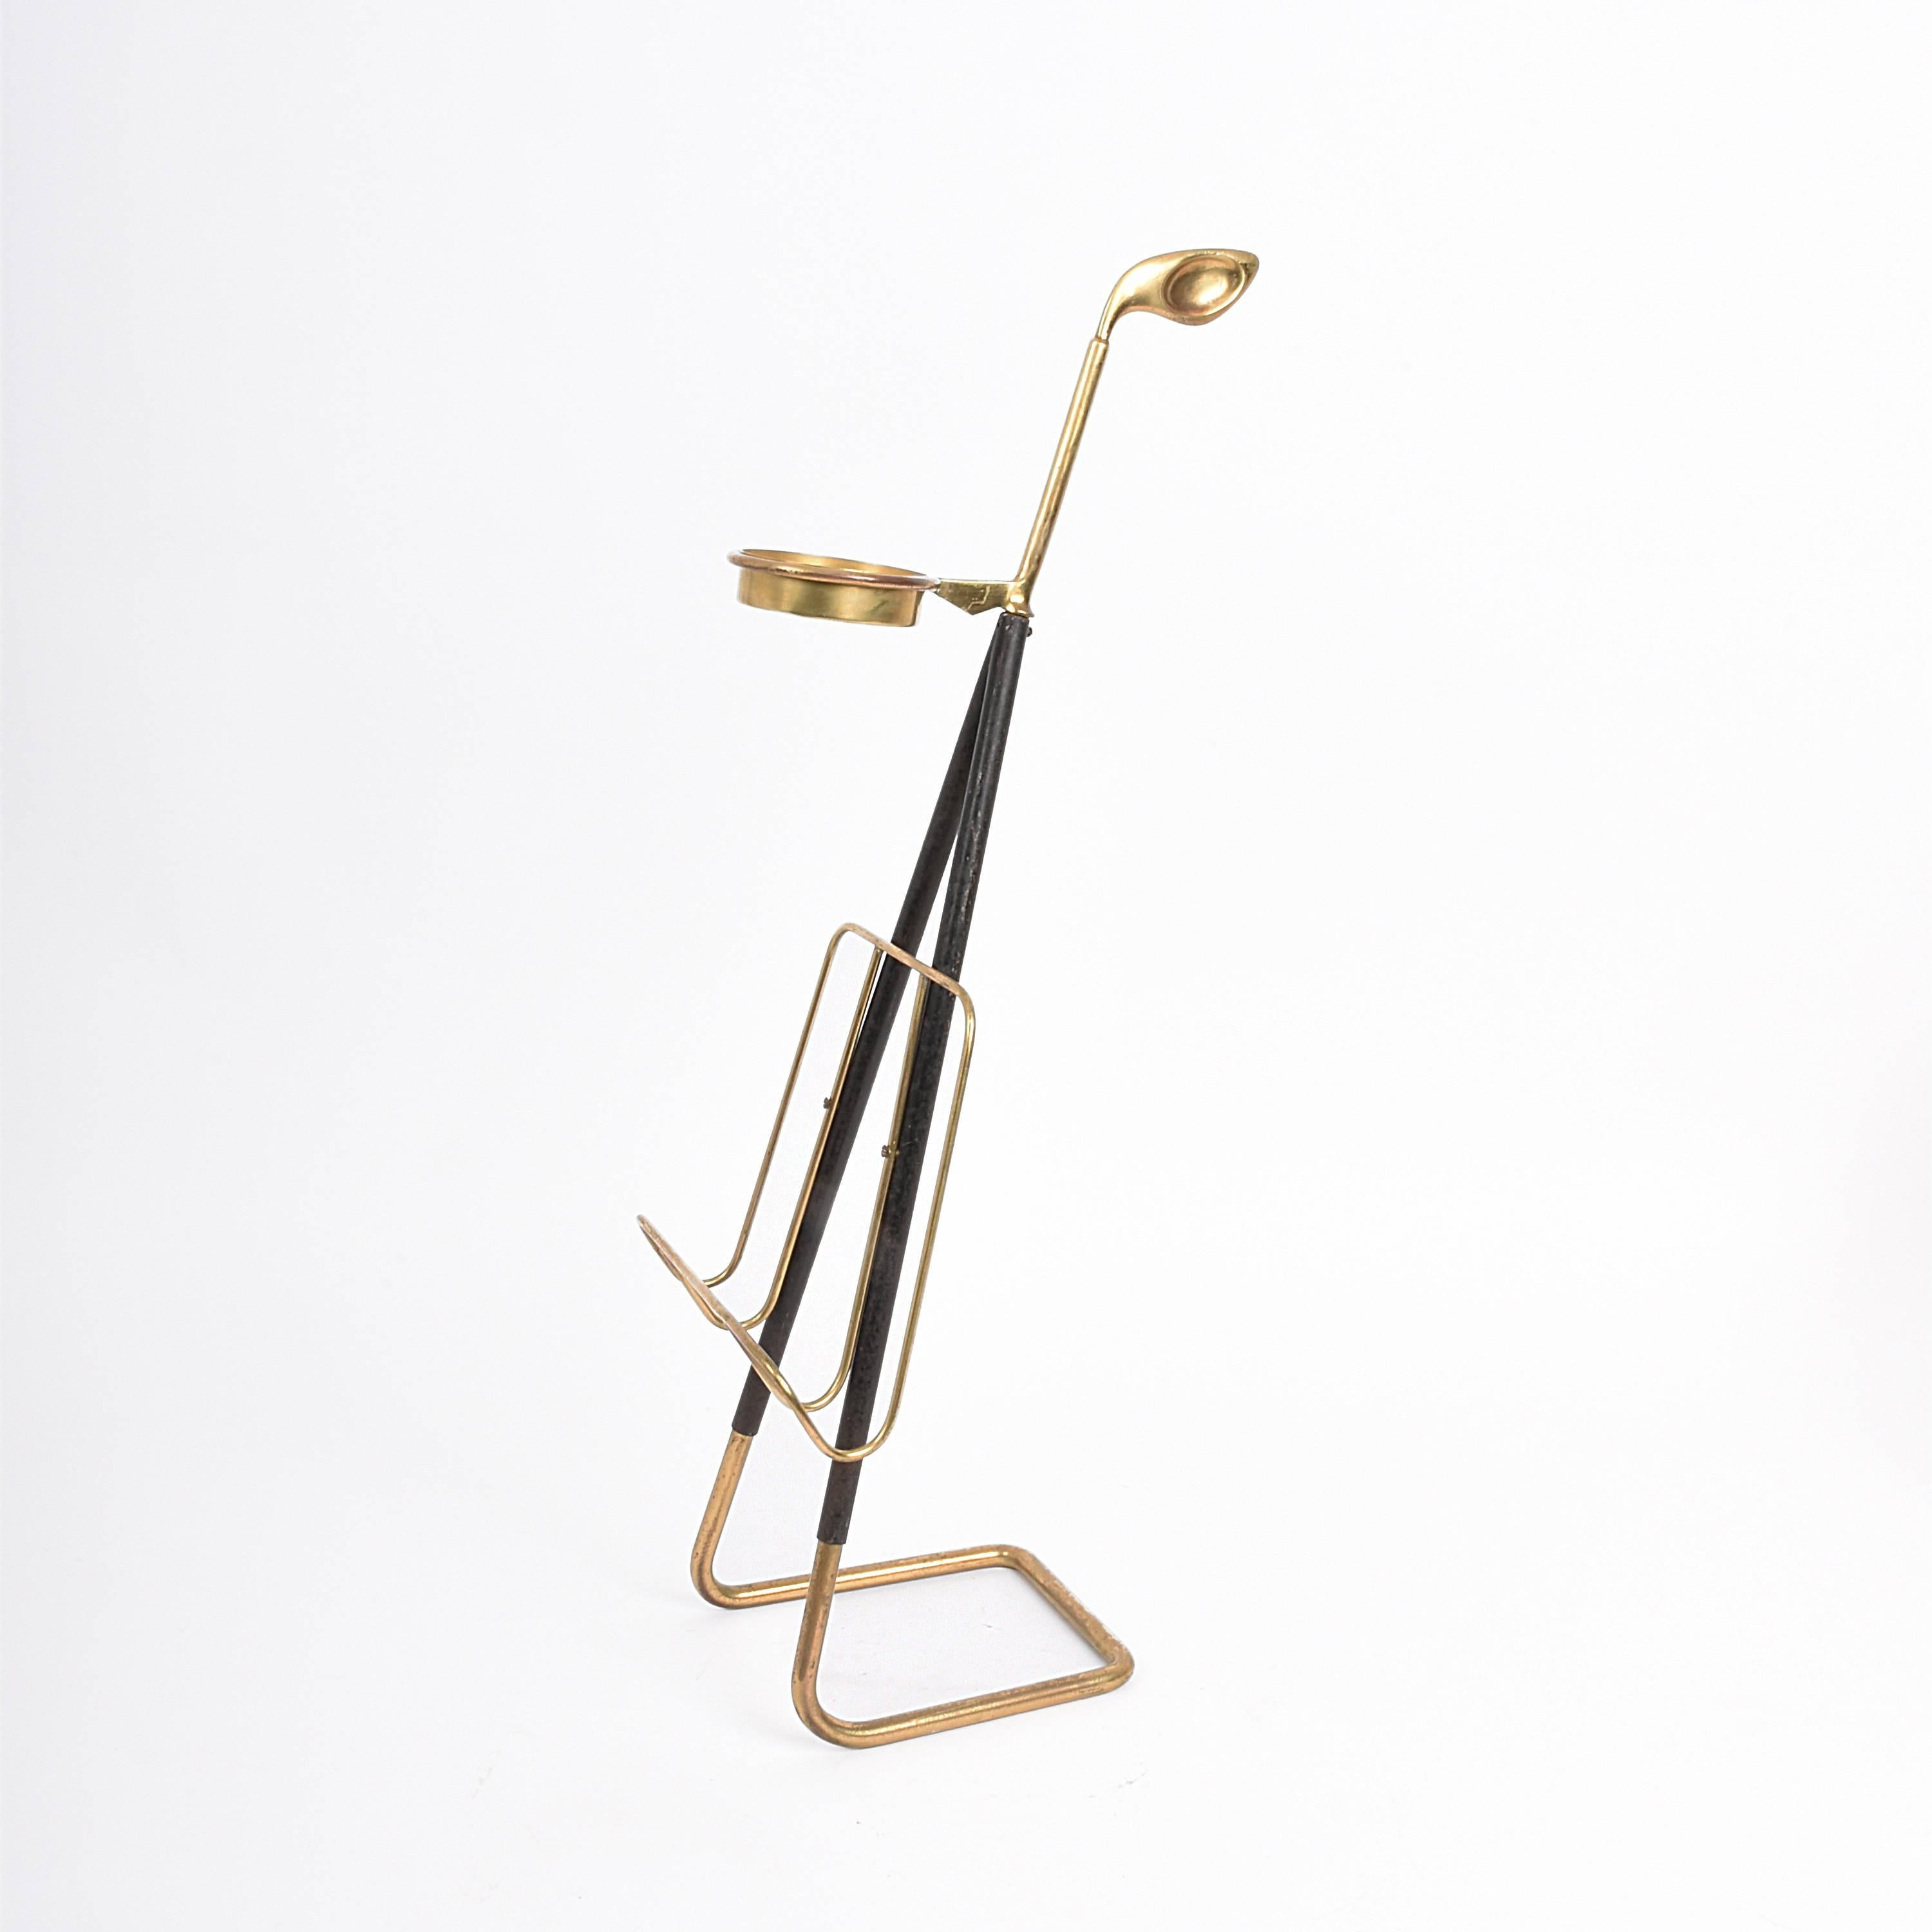 This light and long-limbed magazine rack with the ashtray is representative of the Austrian design during the 50s. 

Made of brass and wrought iron, one of the most extraordinary personalities of Austrian modernism. In fact, this magazine rack is